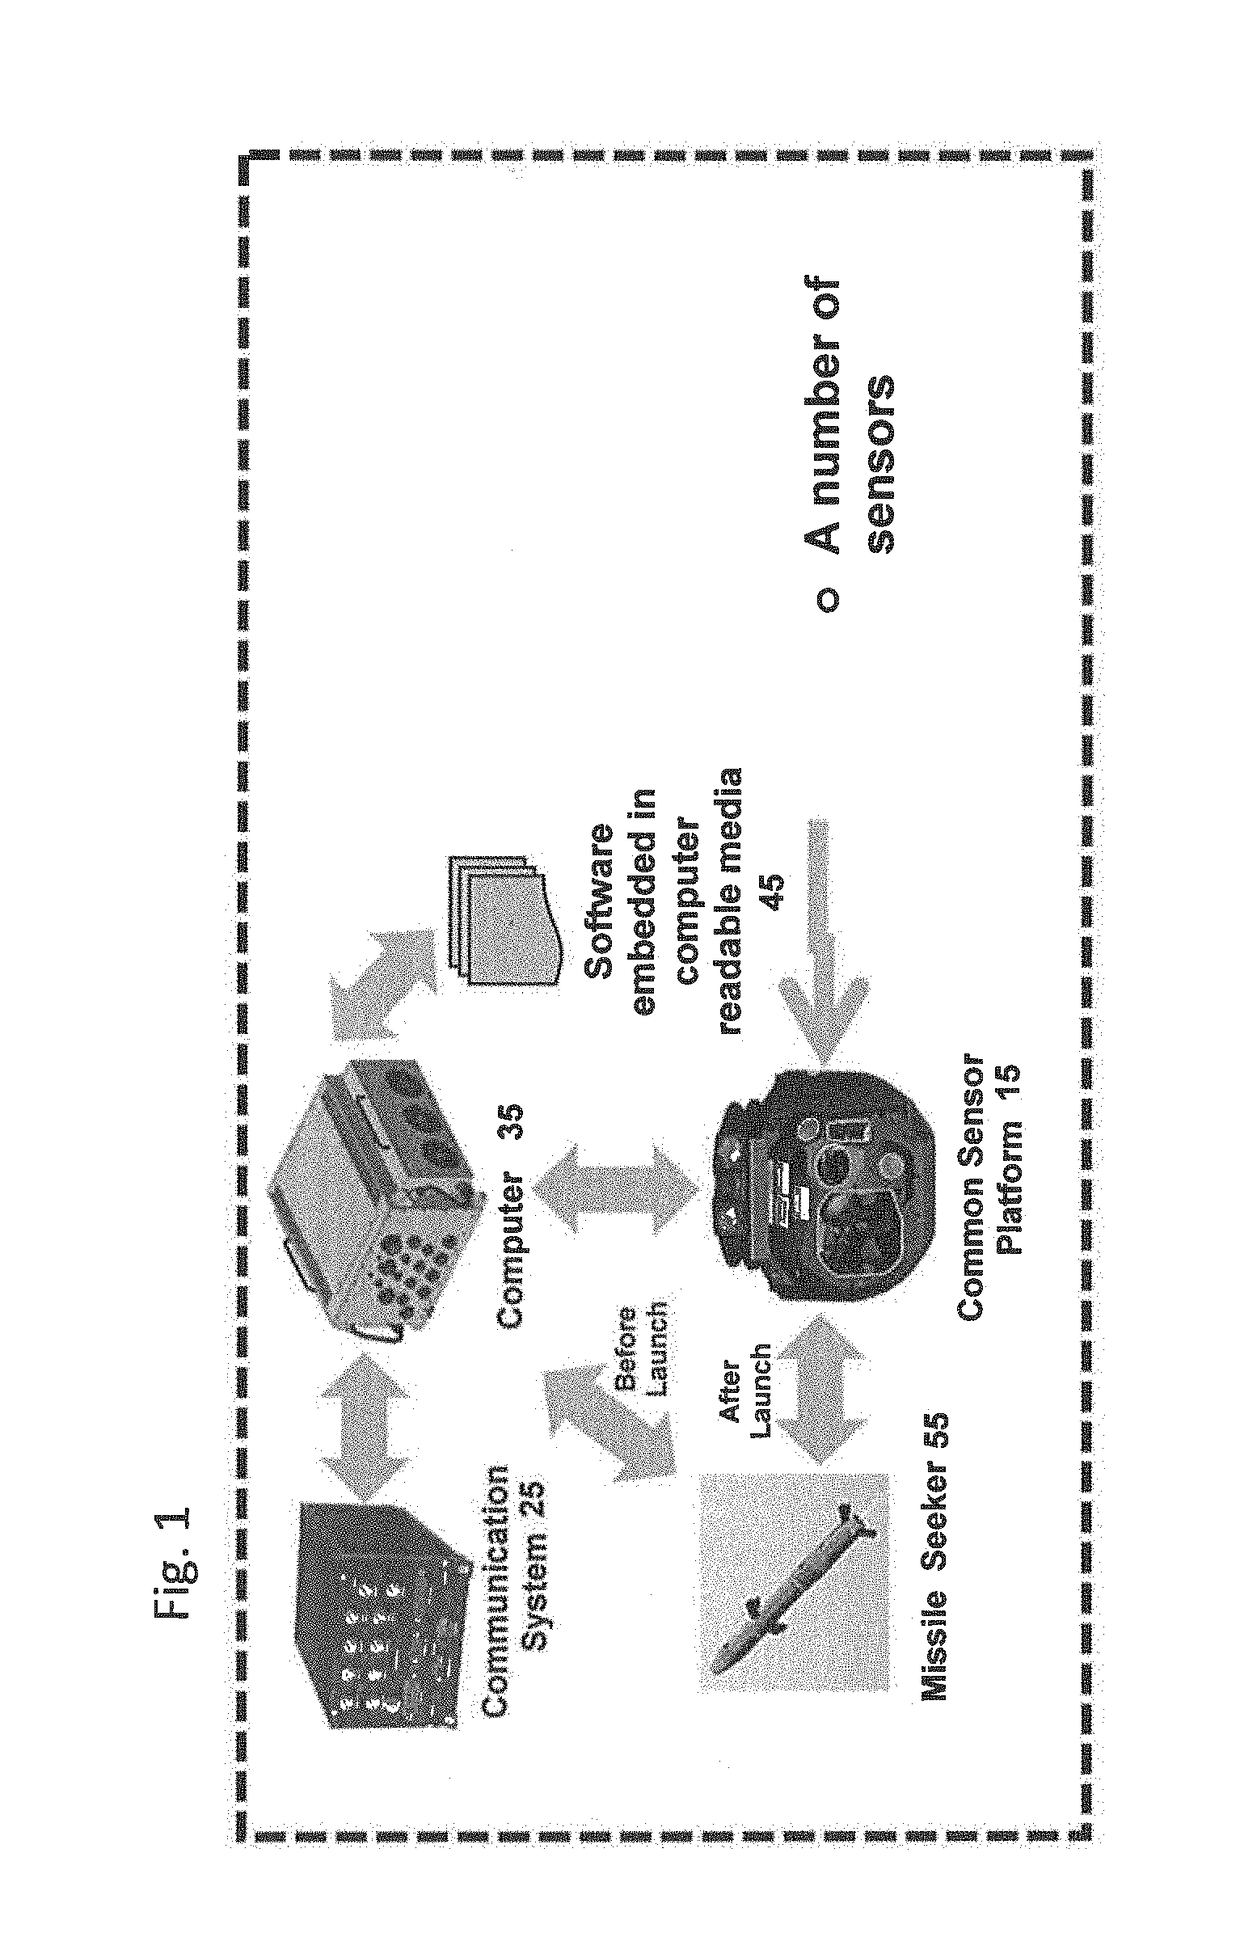 Systems and methods for acquiring and launching and guiding missiles to multiple targets